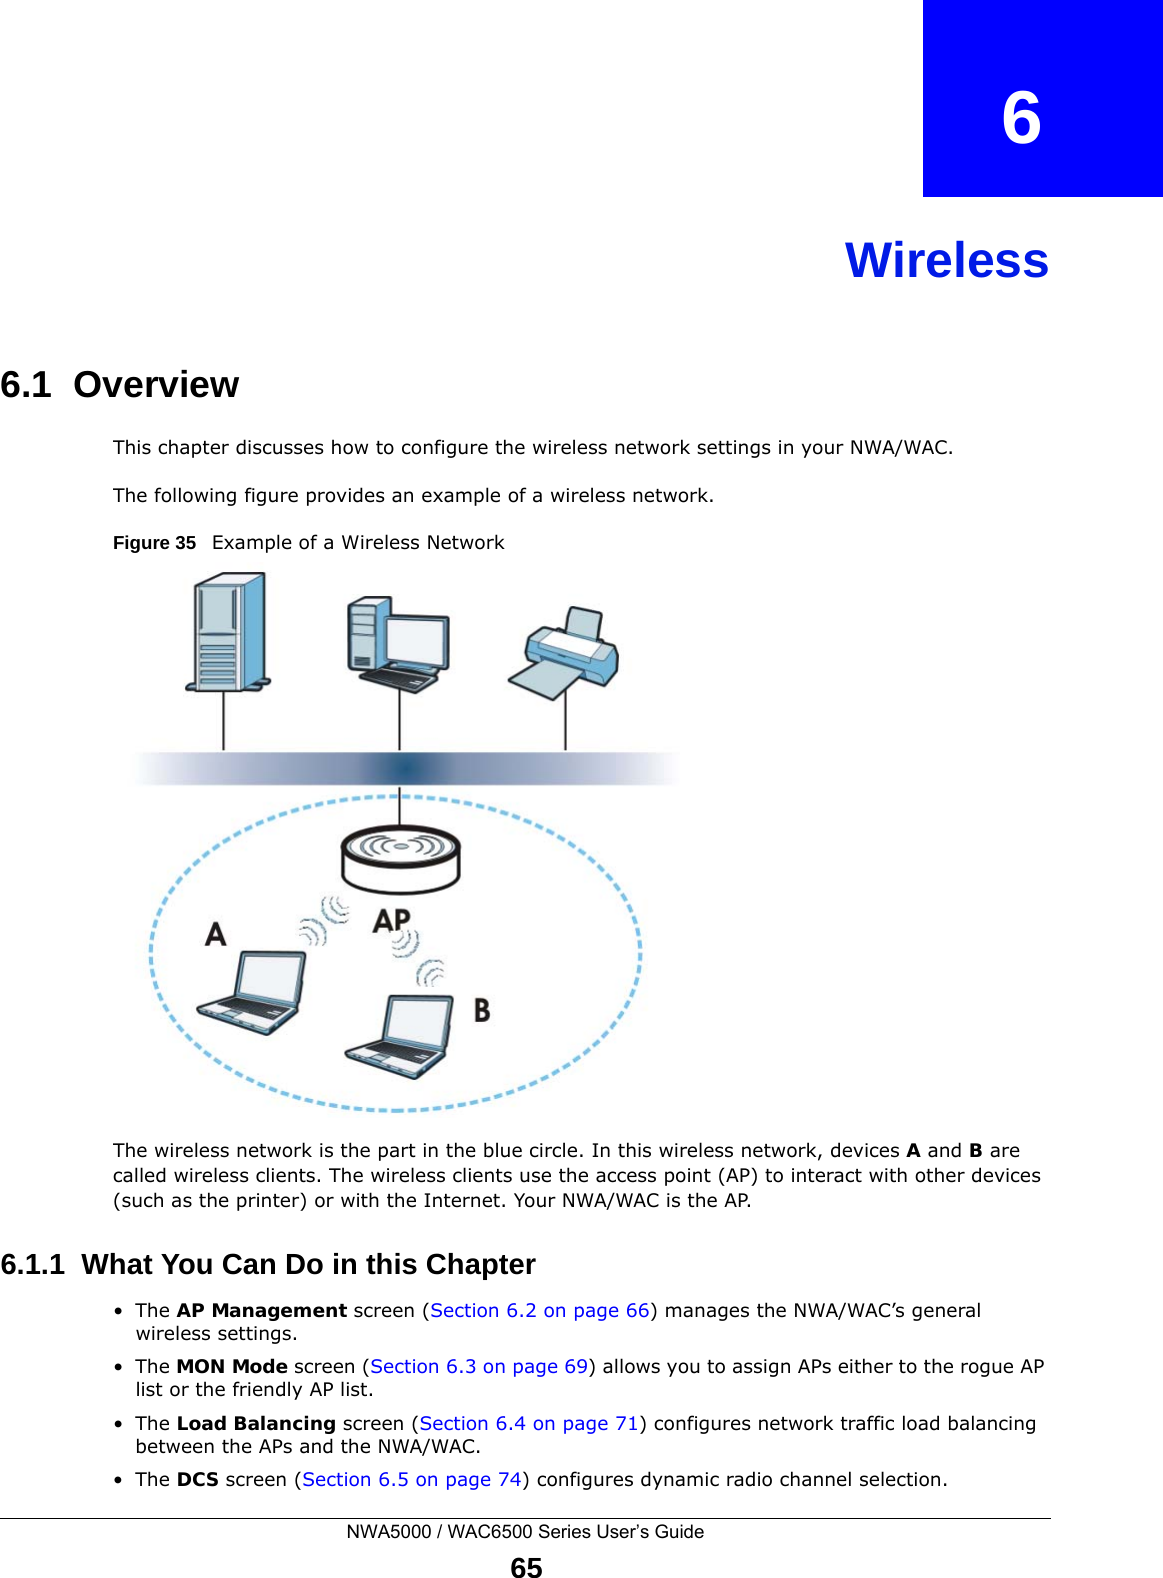 NWA5000 / WAC6500 Series User’s Guide65CHAPTER   6Wireless6.1  OverviewThis chapter discusses how to configure the wireless network settings in your NWA/WAC. The following figure provides an example of a wireless network.Figure 35   Example of a Wireless NetworkThe wireless network is the part in the blue circle. In this wireless network, devices A and B are called wireless clients. The wireless clients use the access point (AP) to interact with other devices (such as the printer) or with the Internet. Your NWA/WAC is the AP.6.1.1  What You Can Do in this Chapter•The AP Management screen (Section 6.2 on page 66) manages the NWA/WAC’s general wireless settings.•The MON Mode screen (Section 6.3 on page 69) allows you to assign APs either to the rogue AP list or the friendly AP list.•The Load Balancing screen (Section 6.4 on page 71) configures network traffic load balancing between the APs and the NWA/WAC. •The DCS screen (Section 6.5 on page 74) configures dynamic radio channel selection.